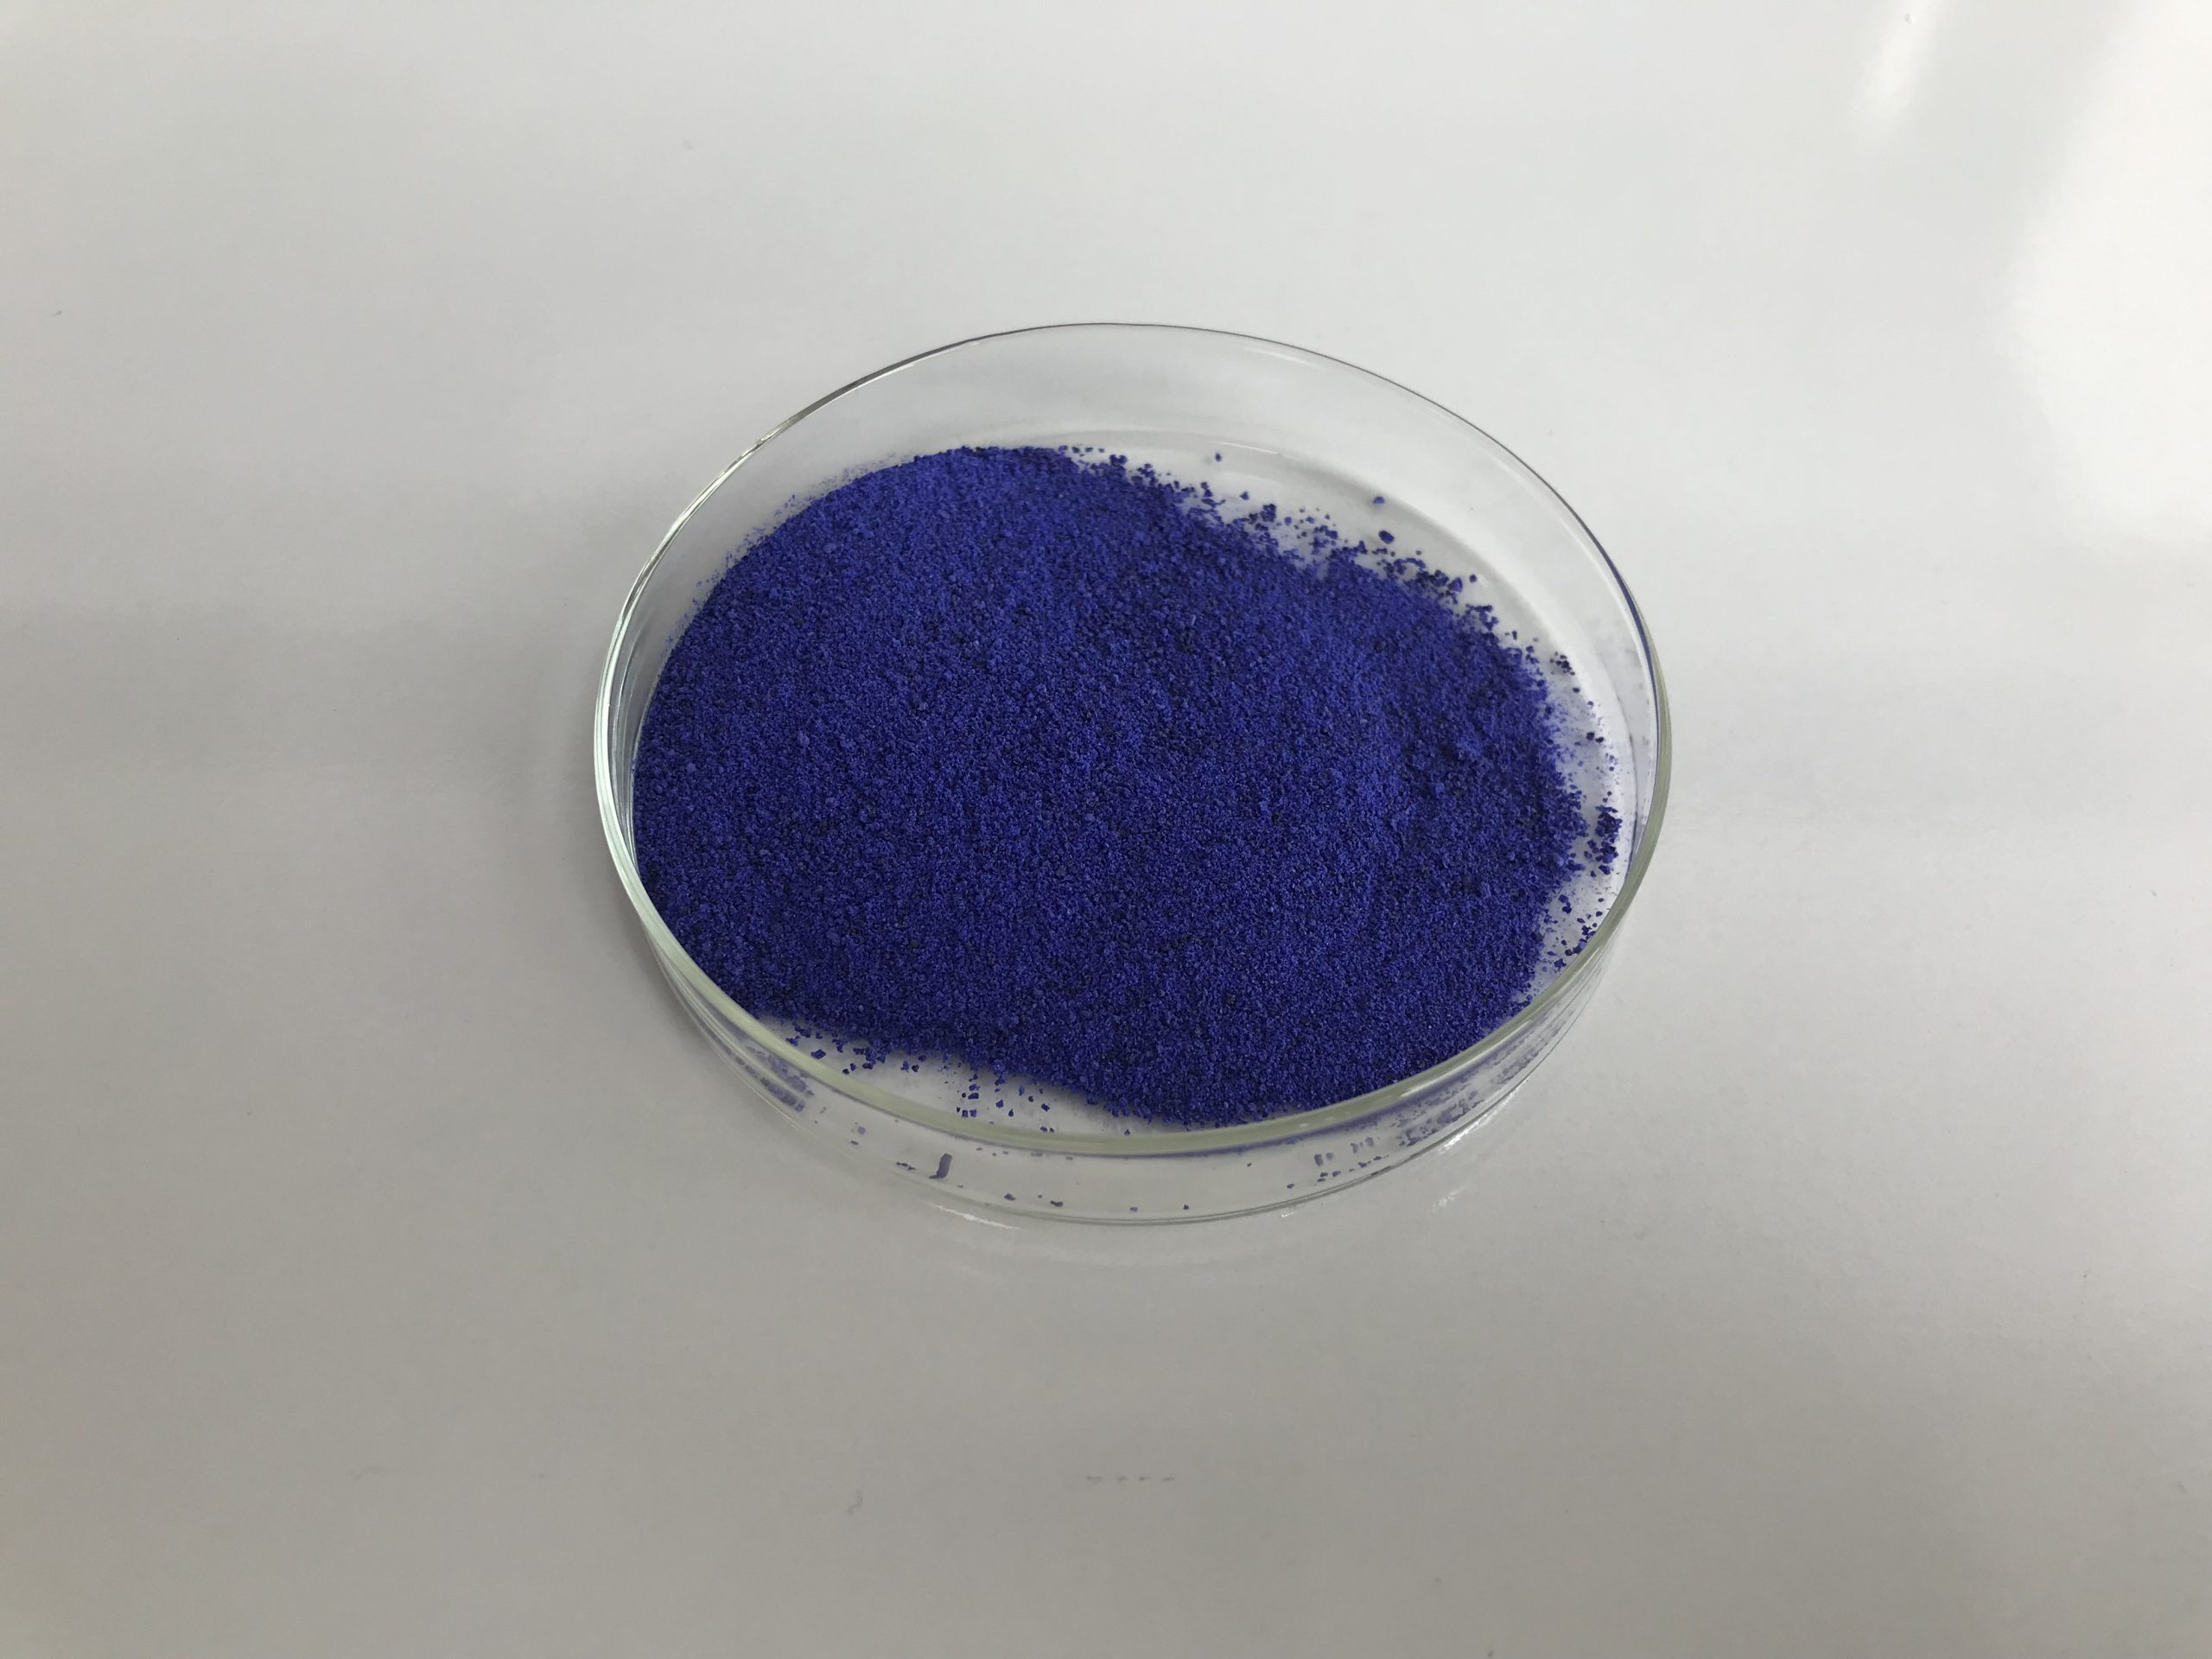 The basic components of Copper Peptide-Xi'an Lyphar Biotech Co., Ltd